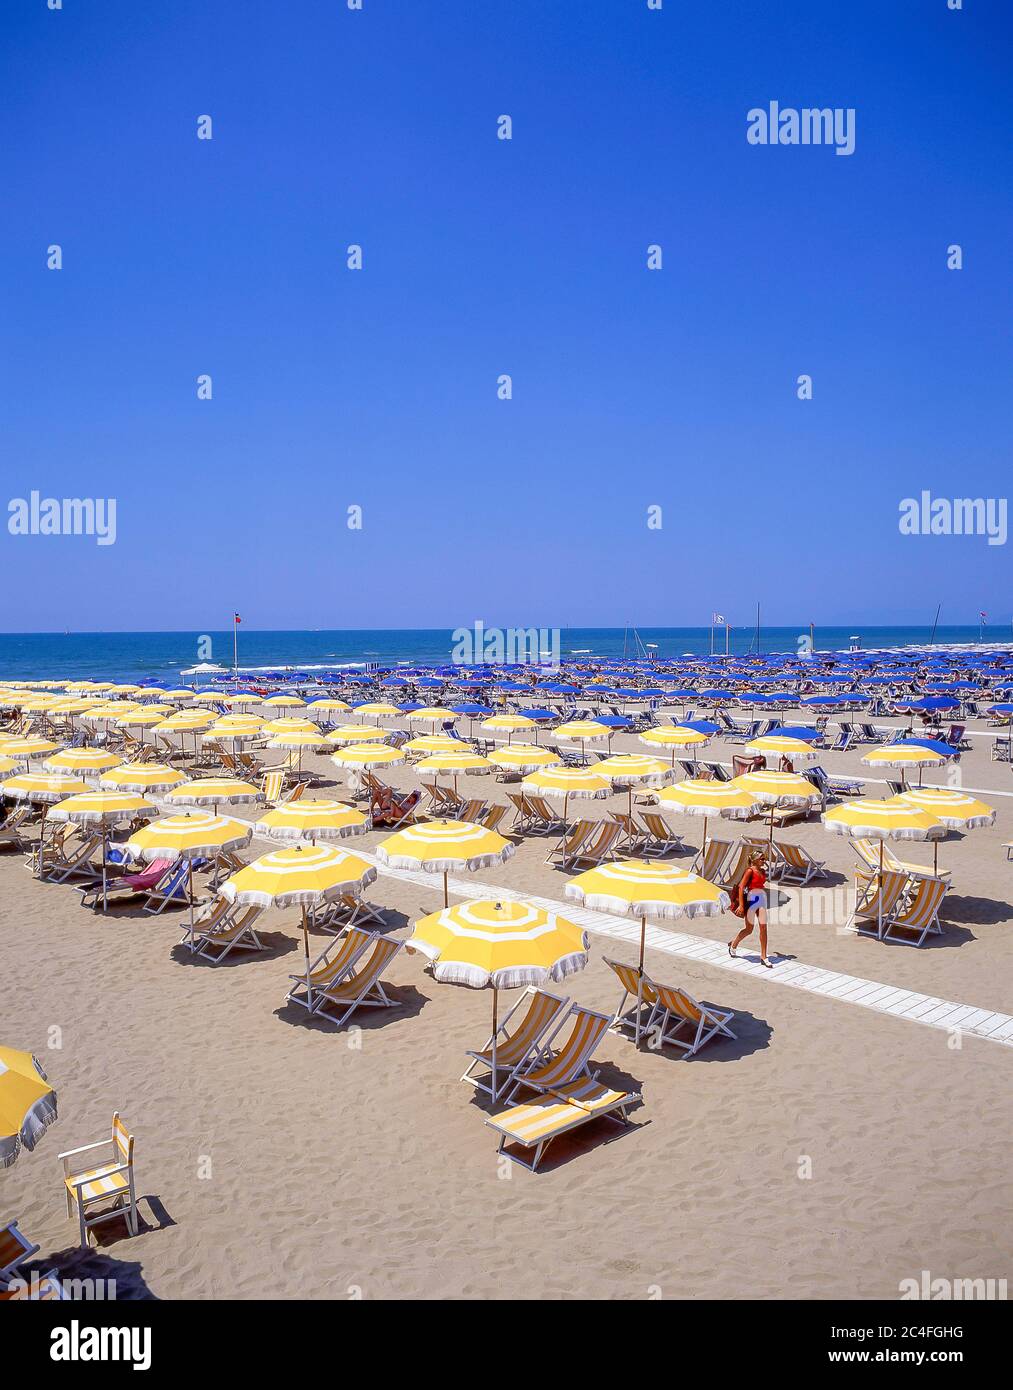 Beach view, Lido di Camaiore, Province of Lucca, Tuscany Region, Italy Stock Photo